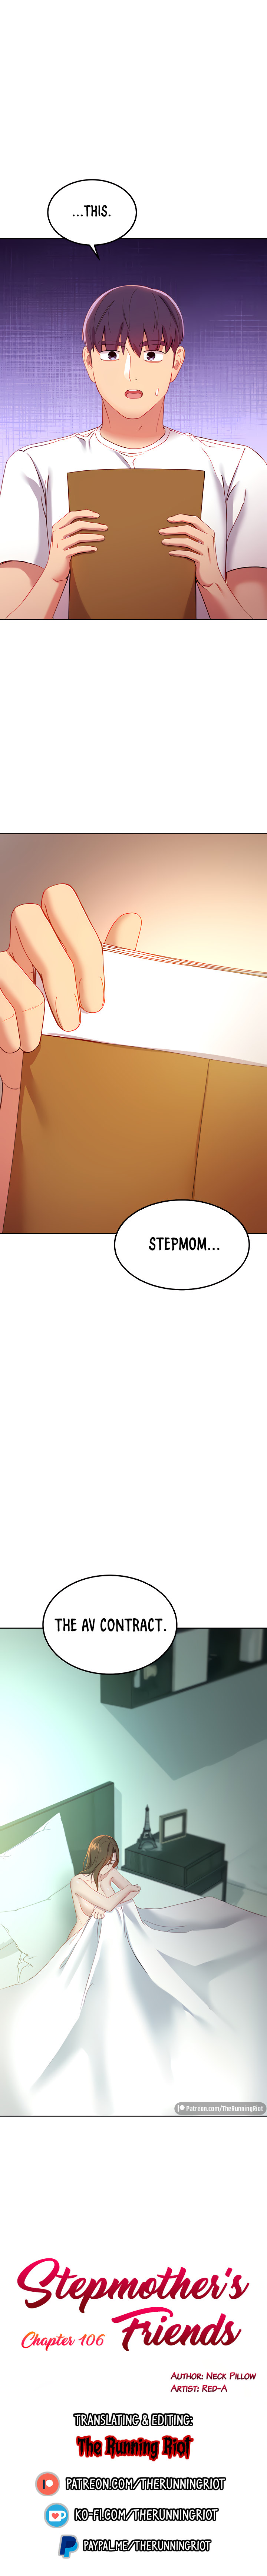 Panel Image 1 for chapter 106 of manhwa Stepmother